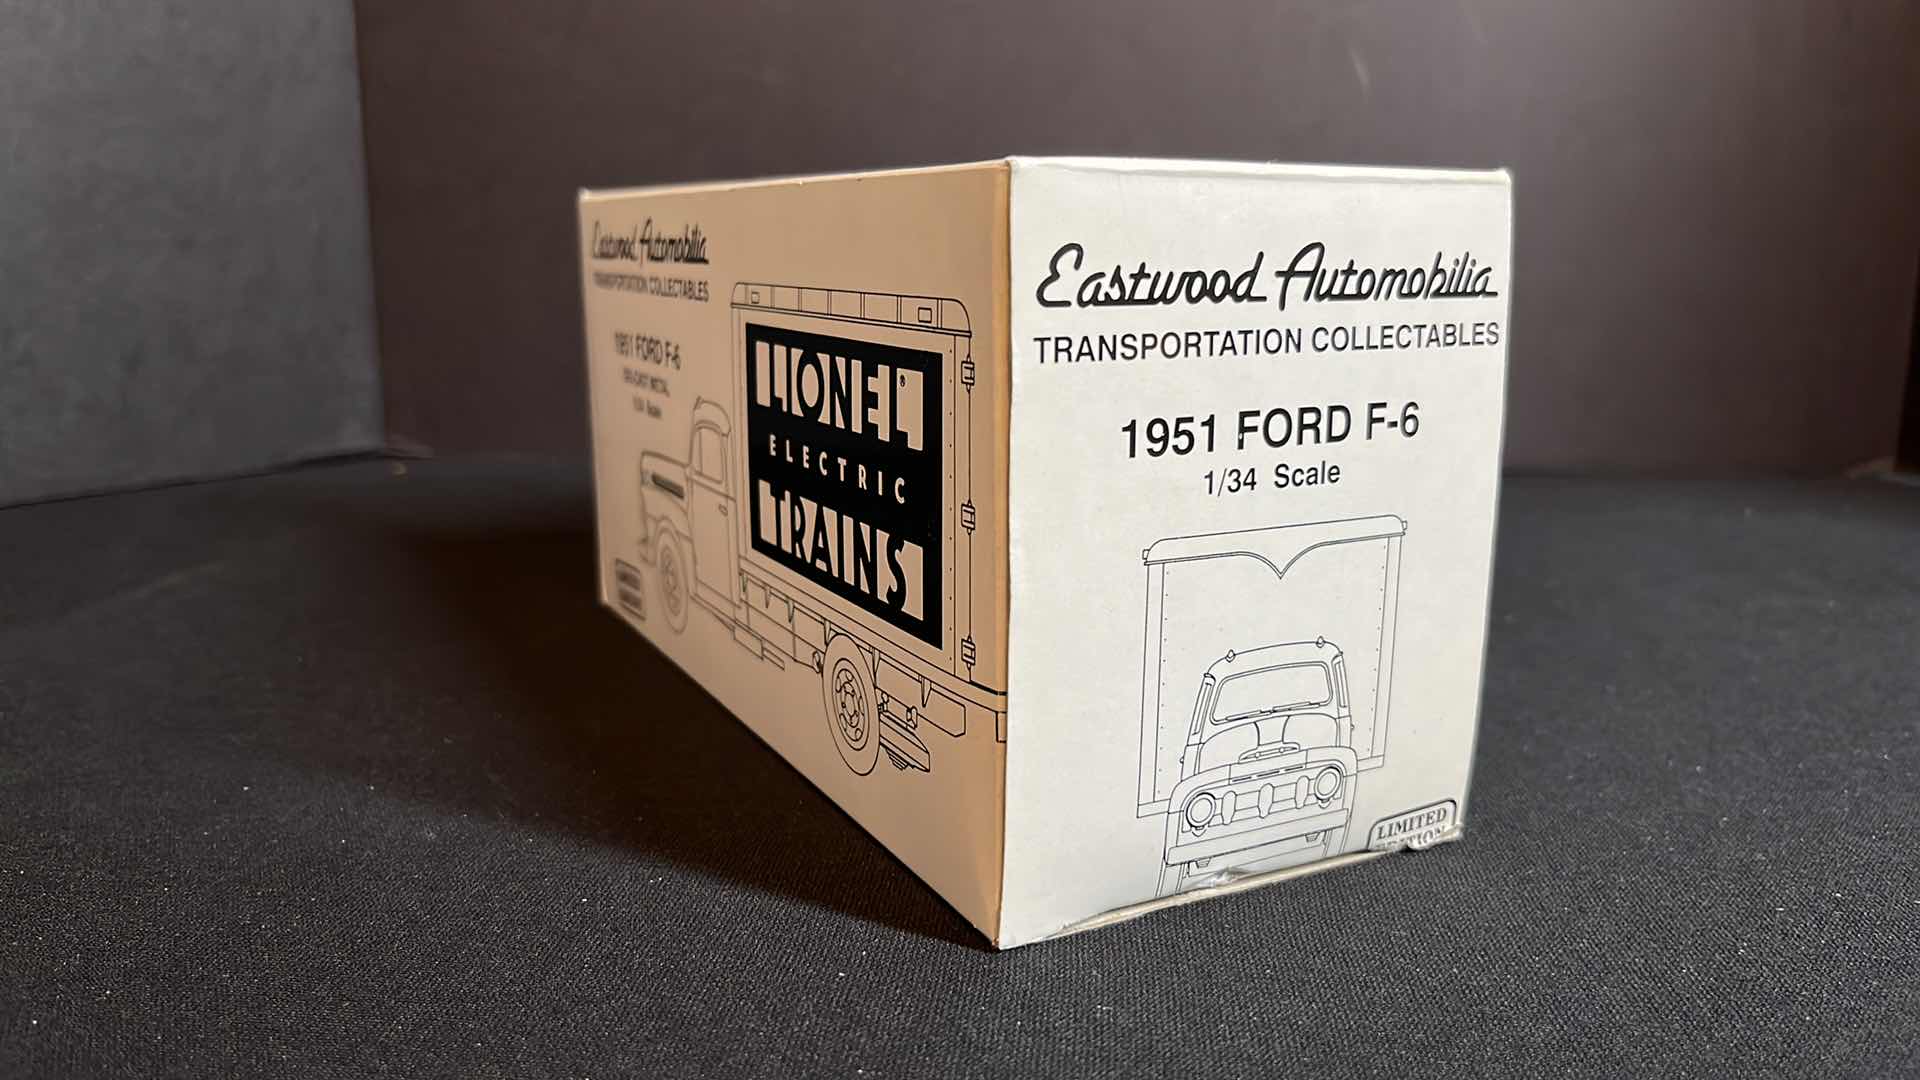 Photo 7 of NIB FIRST GEAR INC EASTWOOD AUTOMOBILIA TRANSPORTATION COLLECTABLES LIONEL ELECTRIC TRAINS DIE-CAST METAL 1/34 SCALE 1951 FORD F-6, 1992 (STOCK #19-0104)